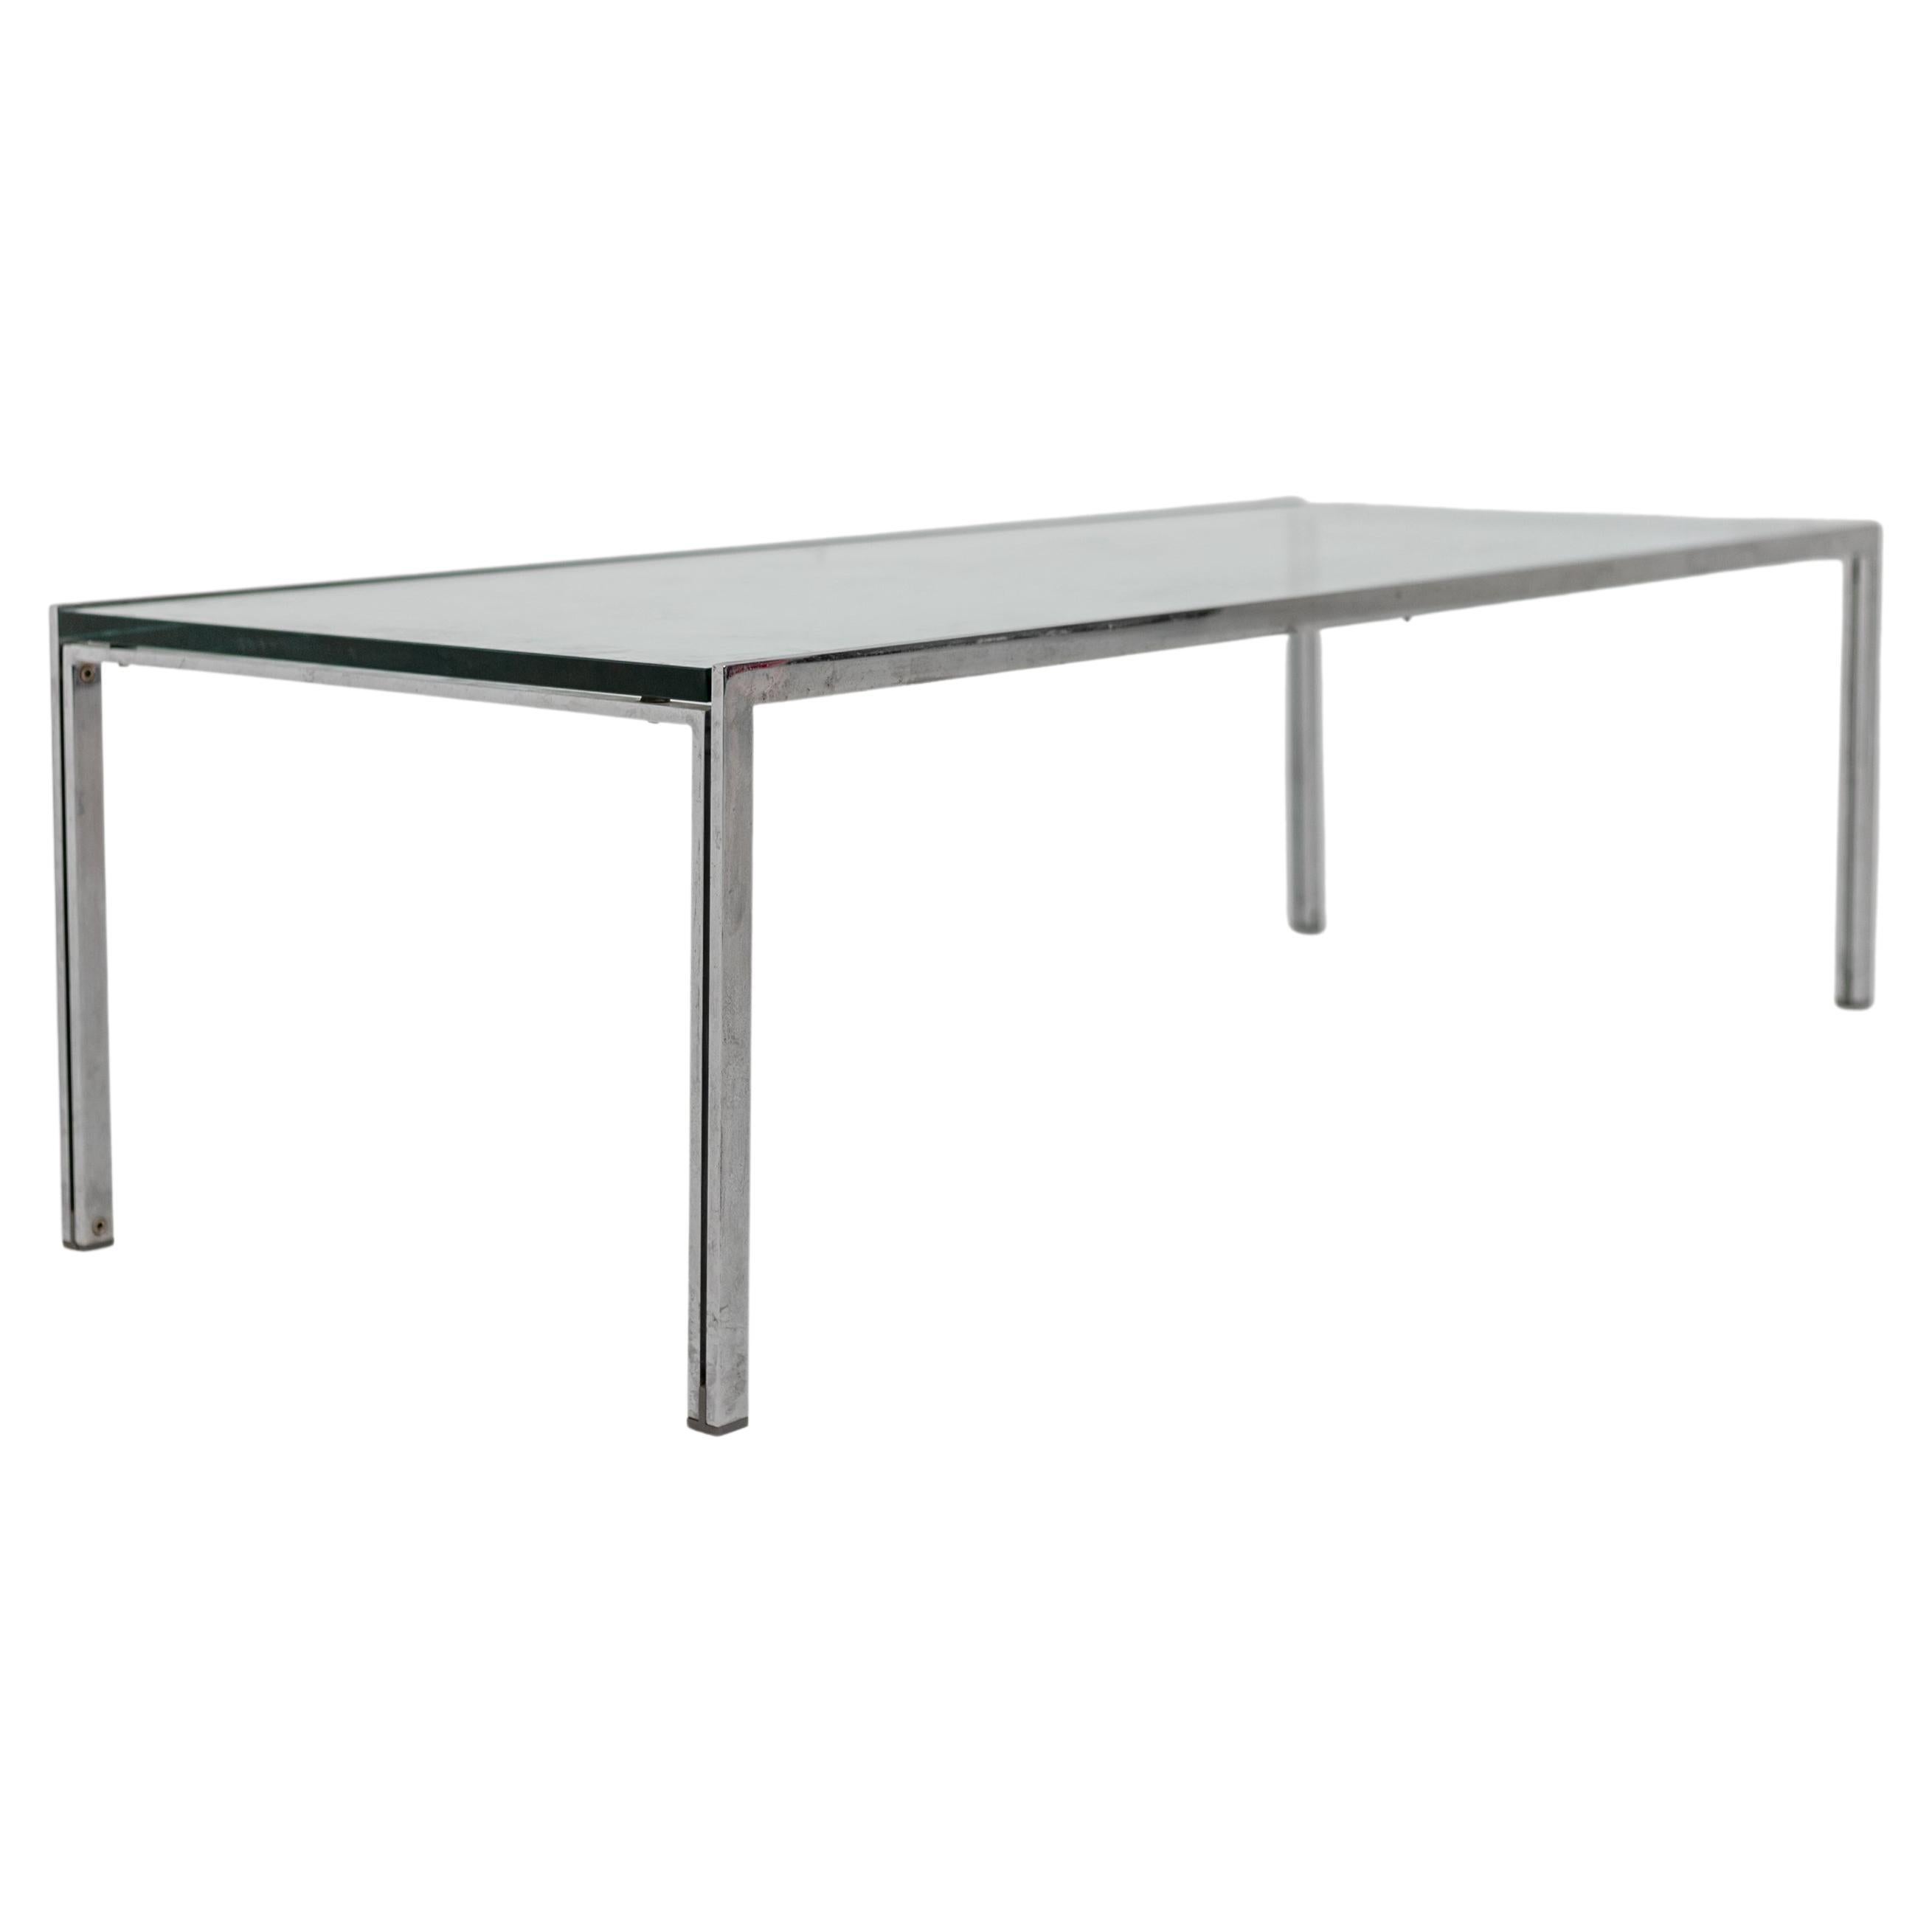 Low Living Room Table by Ross Littell for Depadova in Steel and Glass